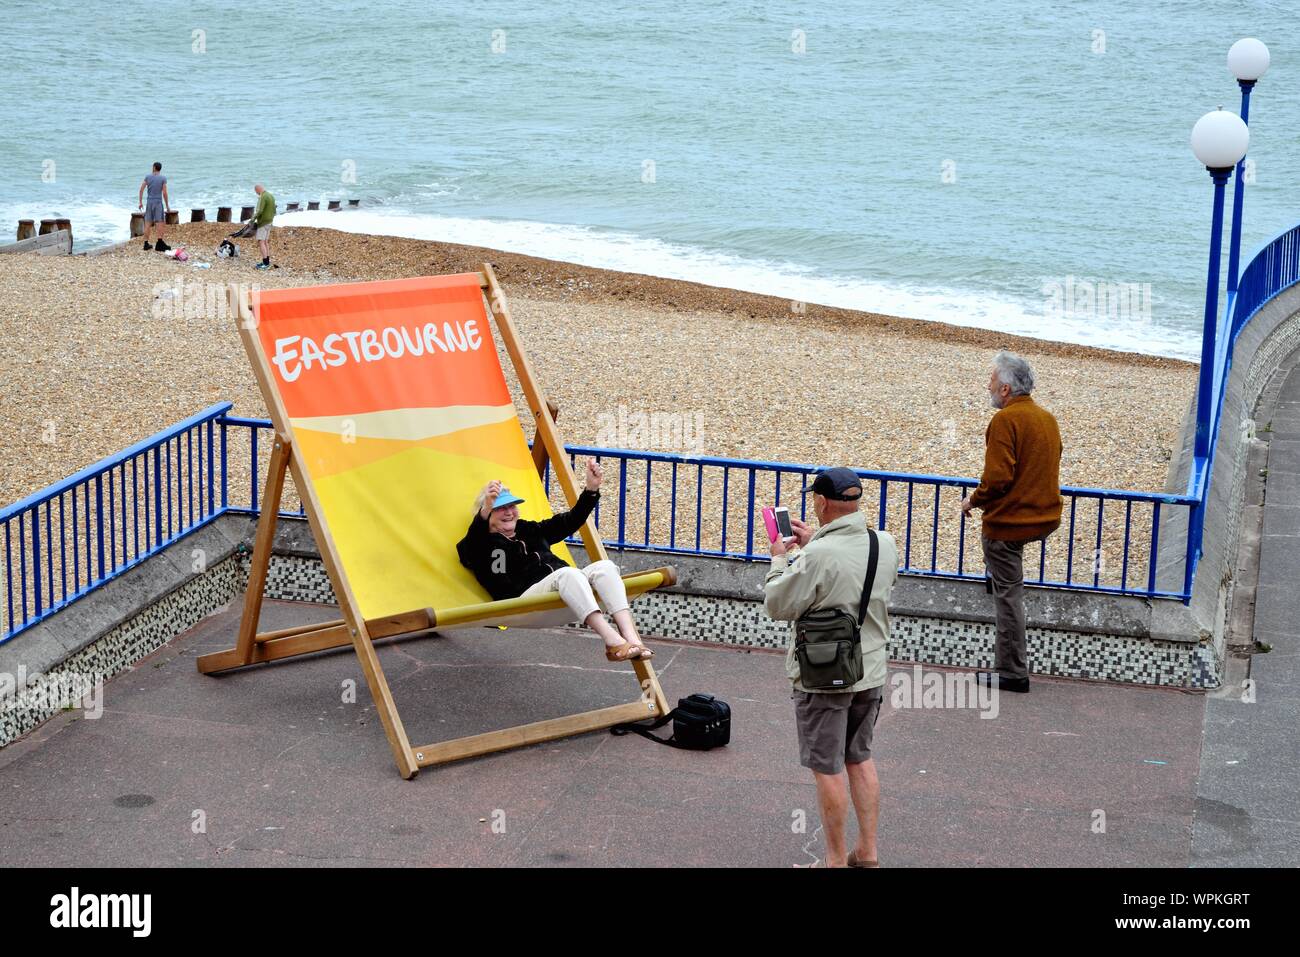 An old lady sitting on an oversized deckchair having fun and waving her arms while being photographed on Eastbourne seafront, Sussex England UK Stock Photo